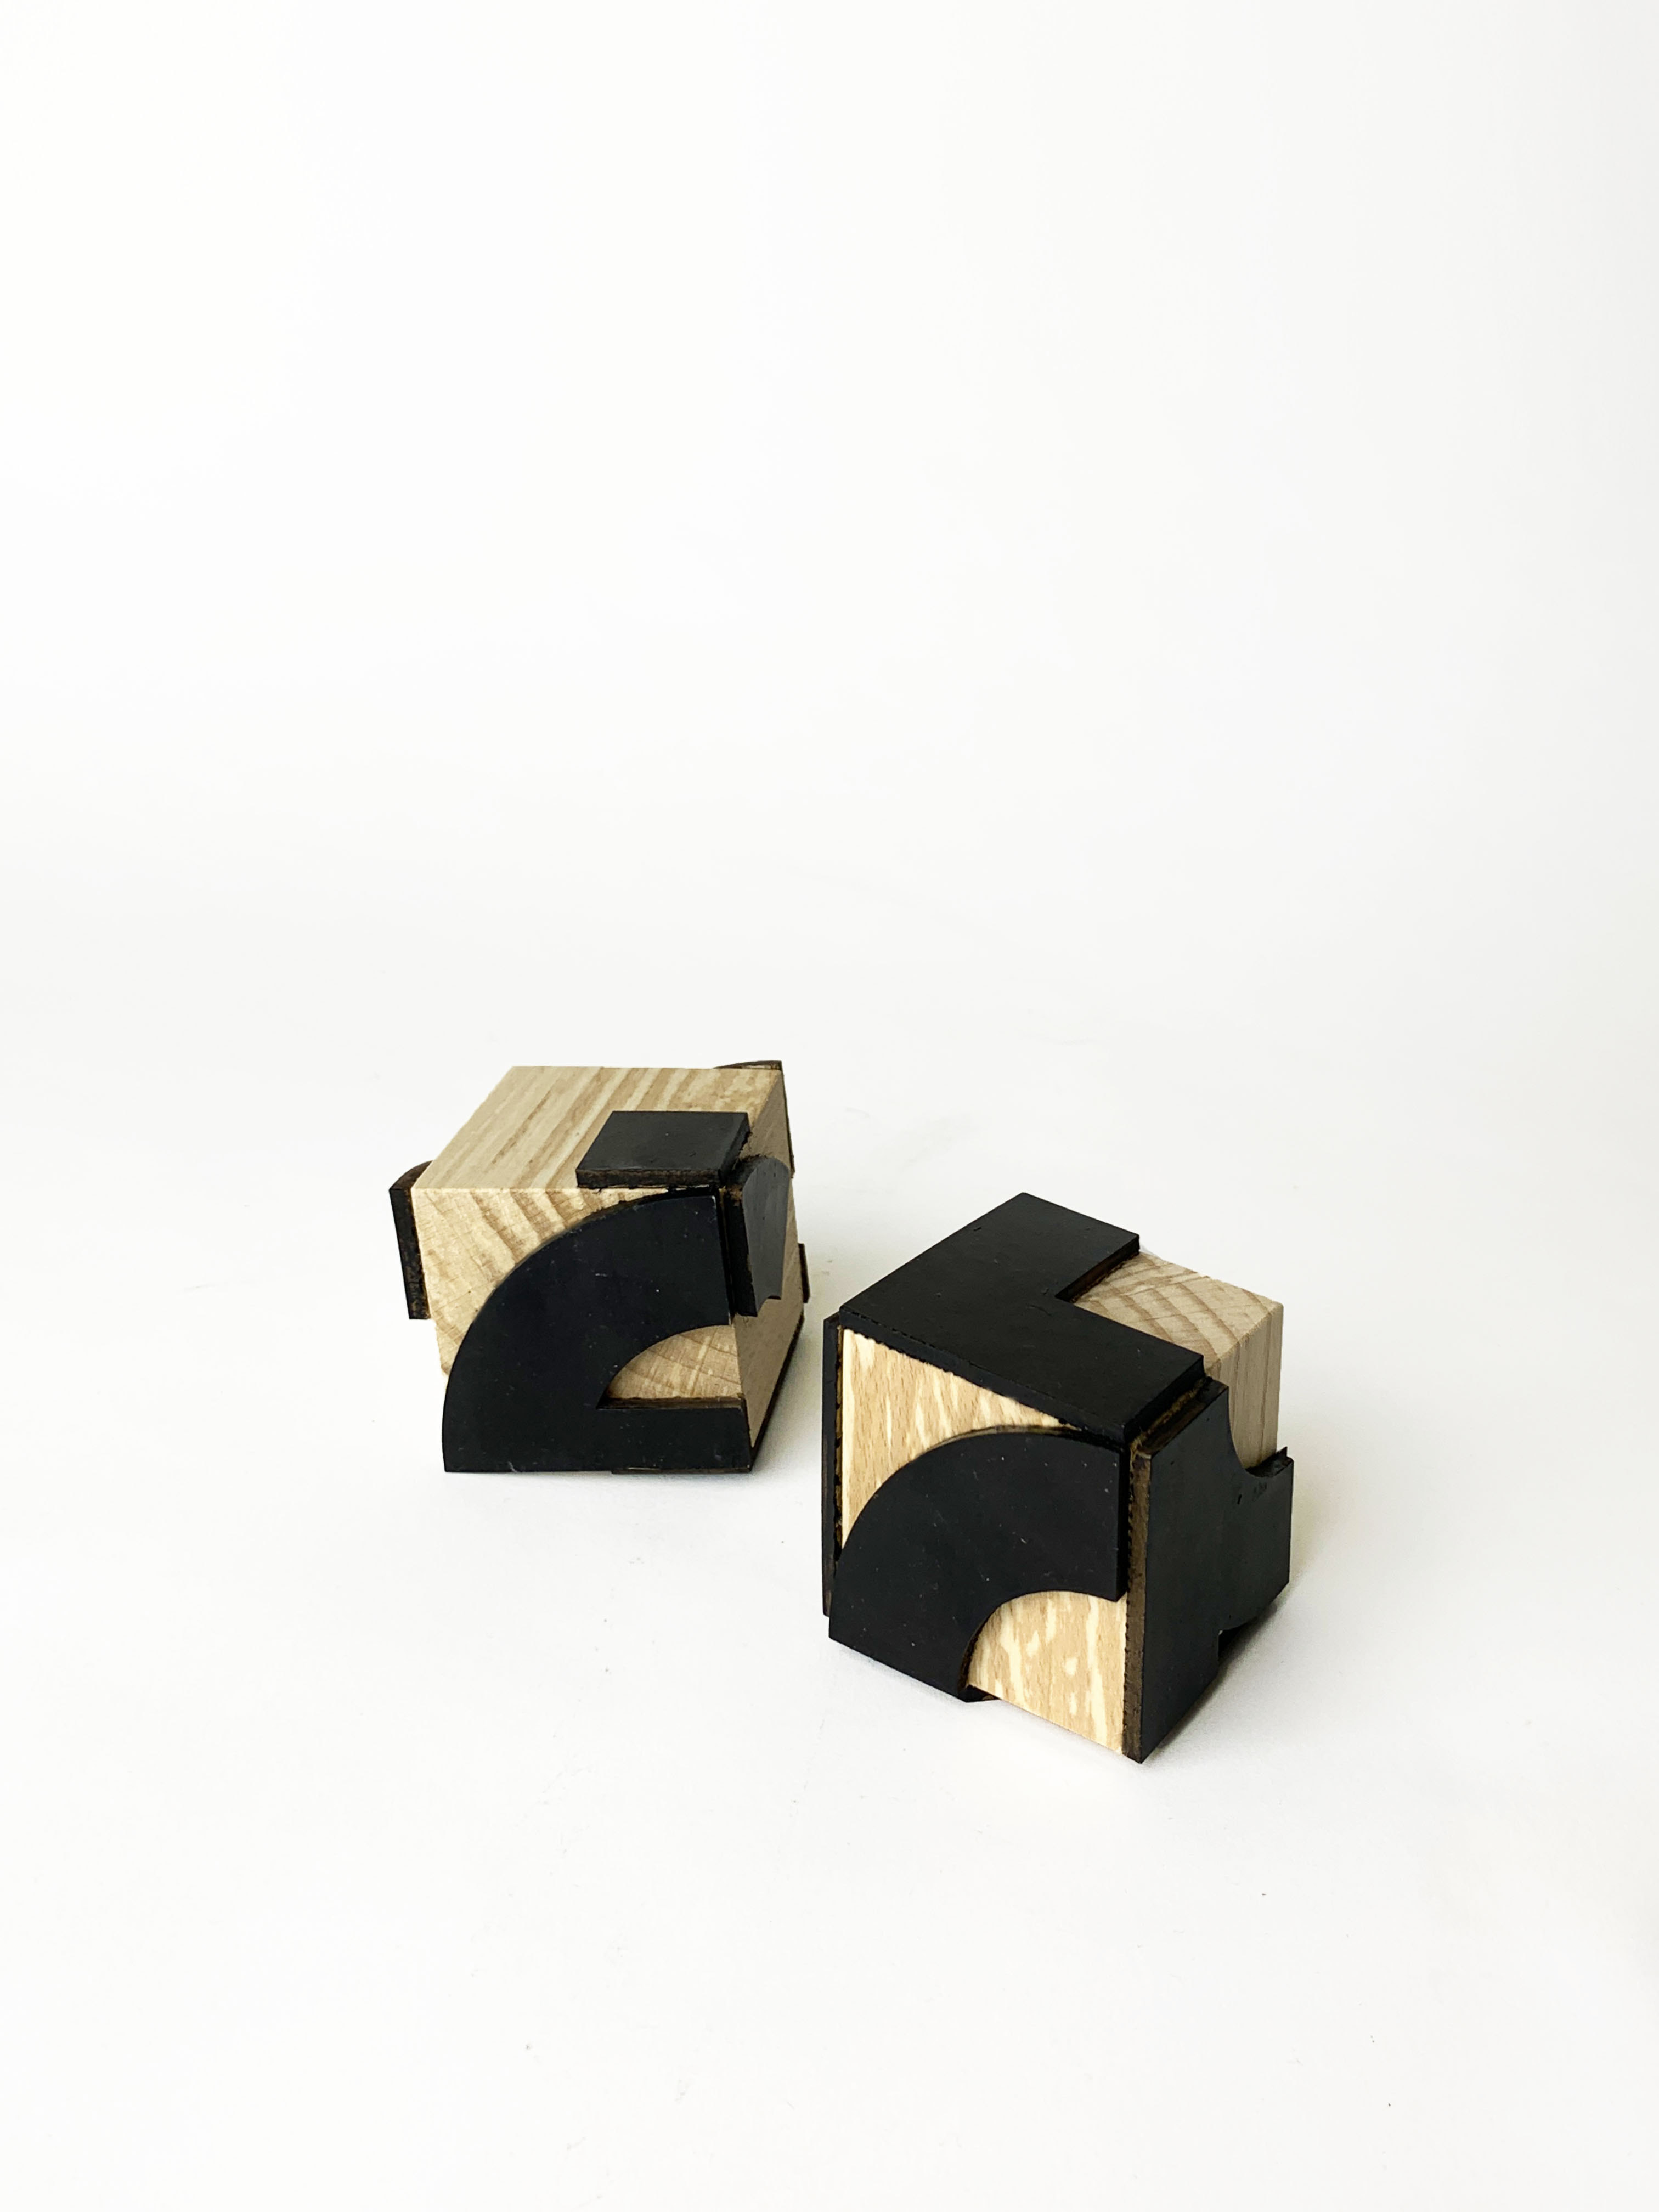 Modular cubes - An early introduction to typography as preparation for primary school by Deniz Kaya - Creative Work